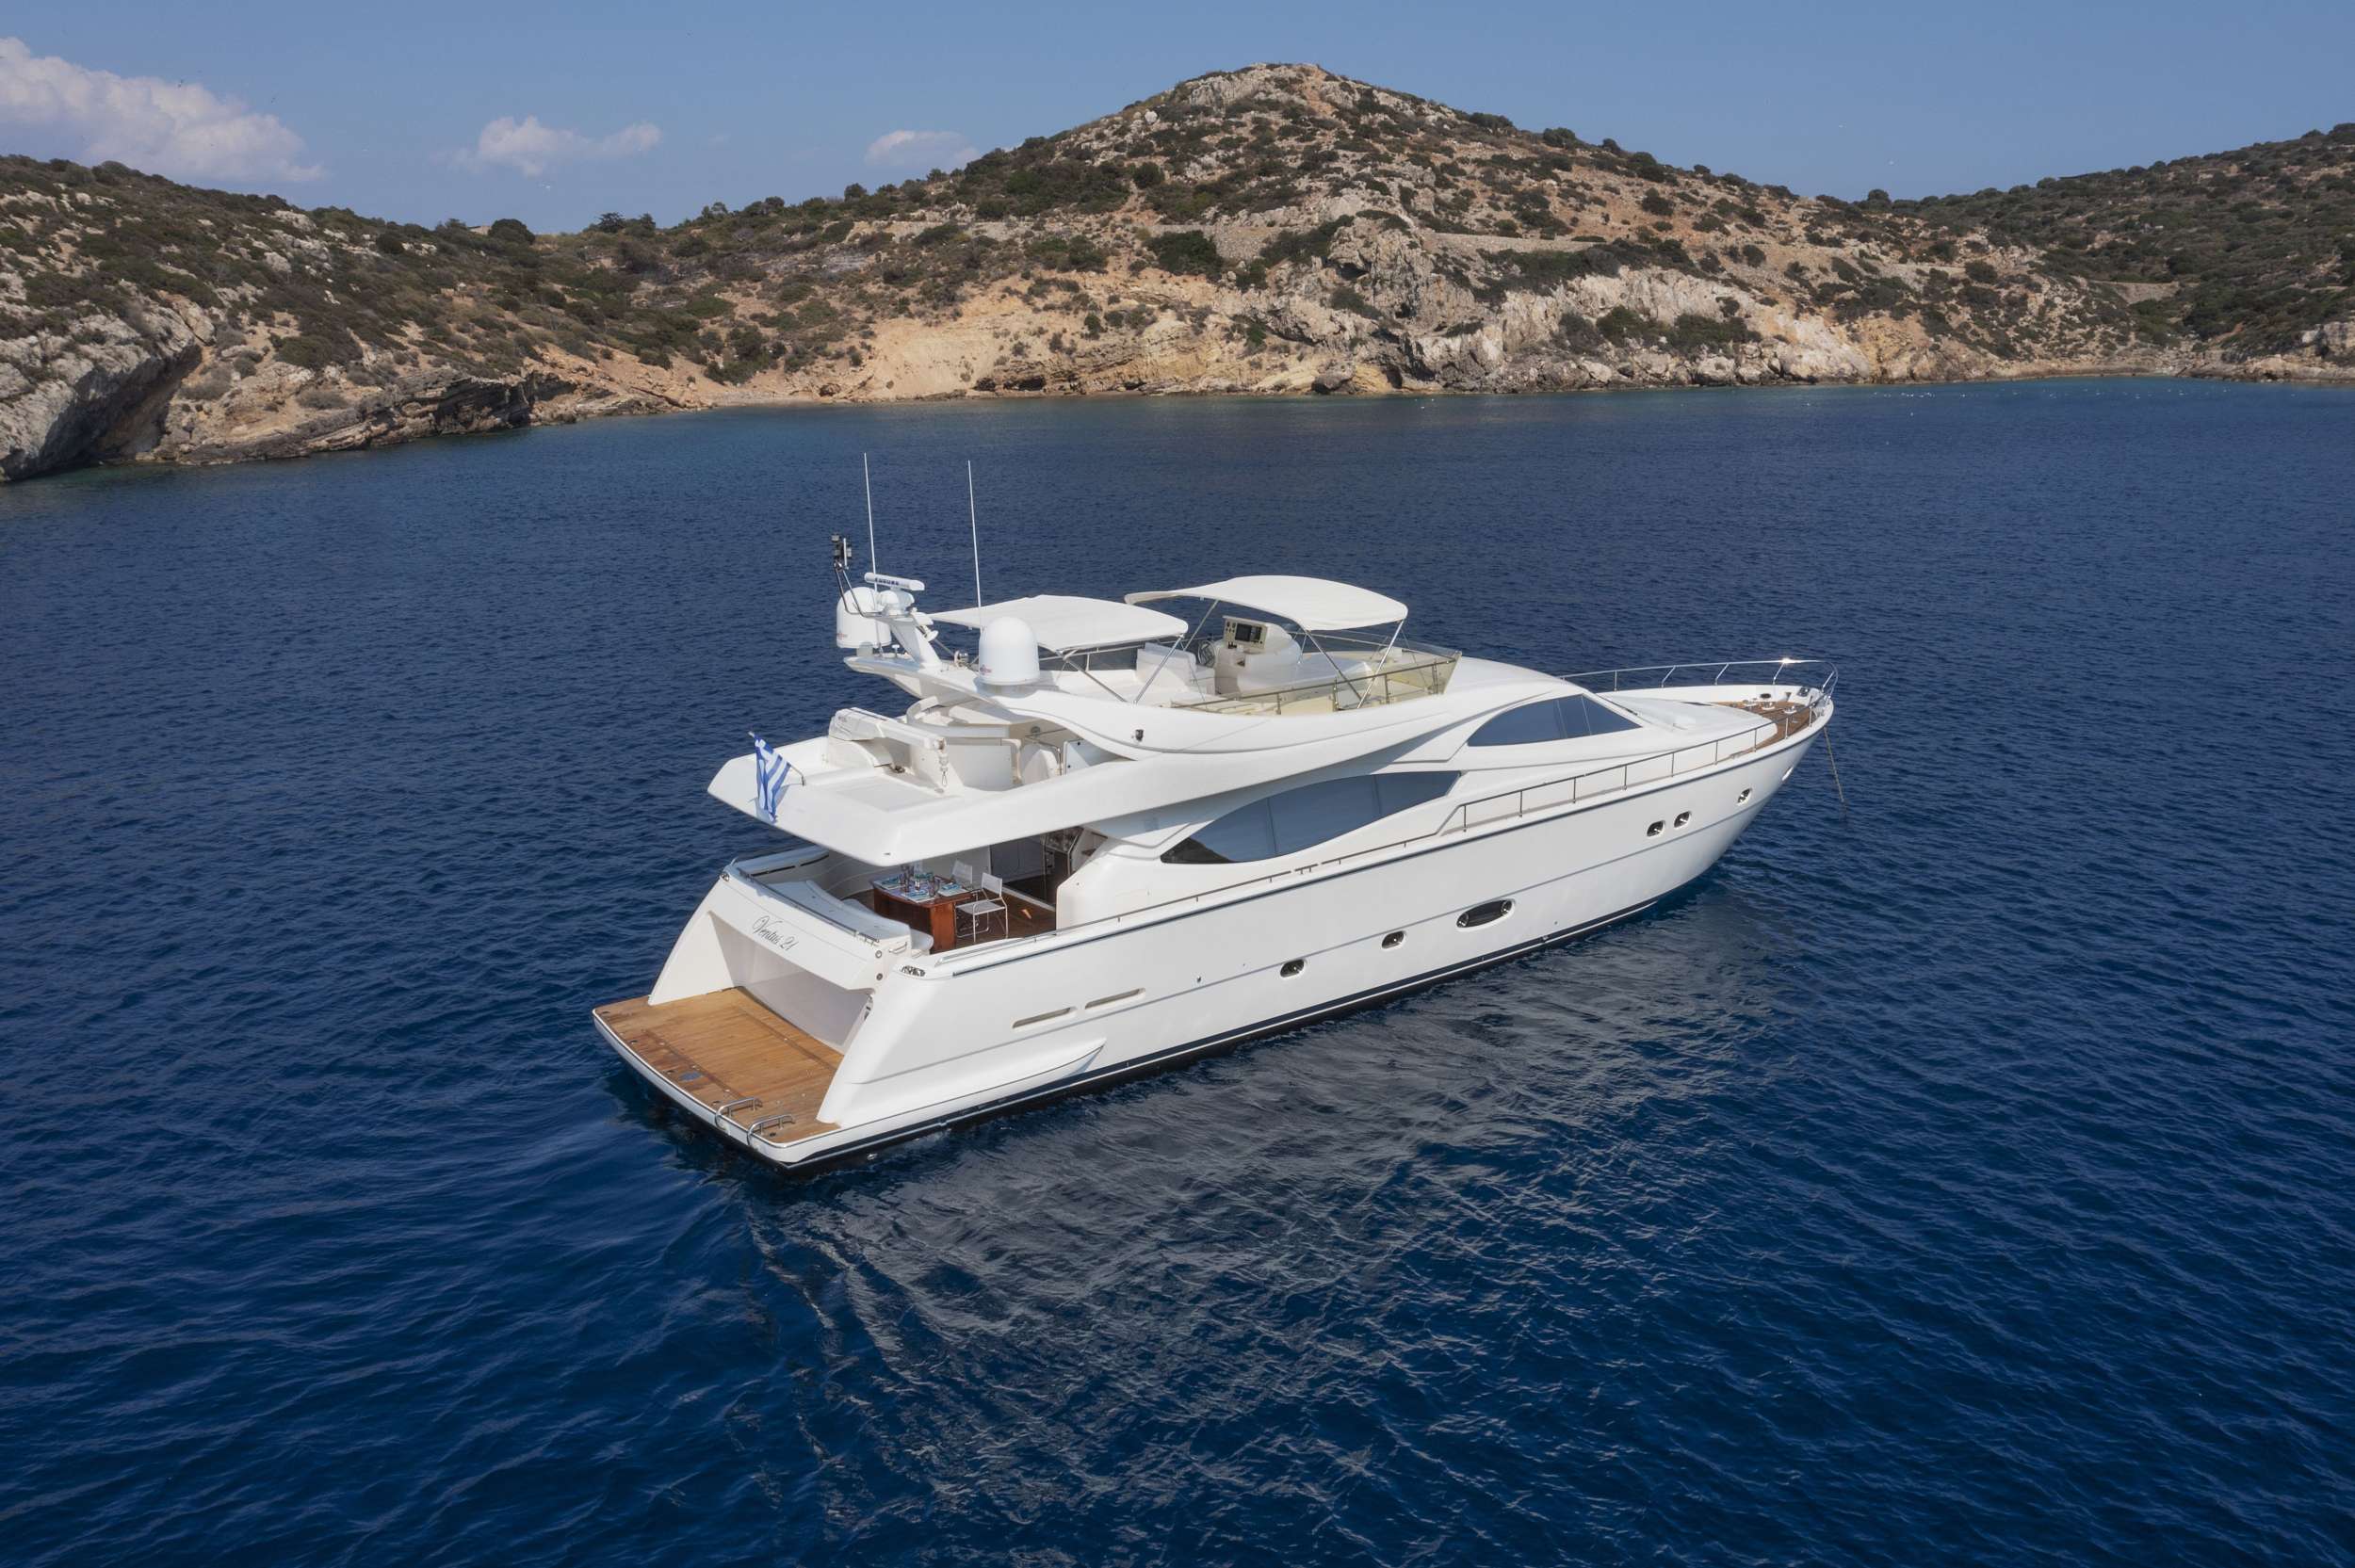 Ventus 21 - Yacht Charter Palairos & Boat hire in Greece 1